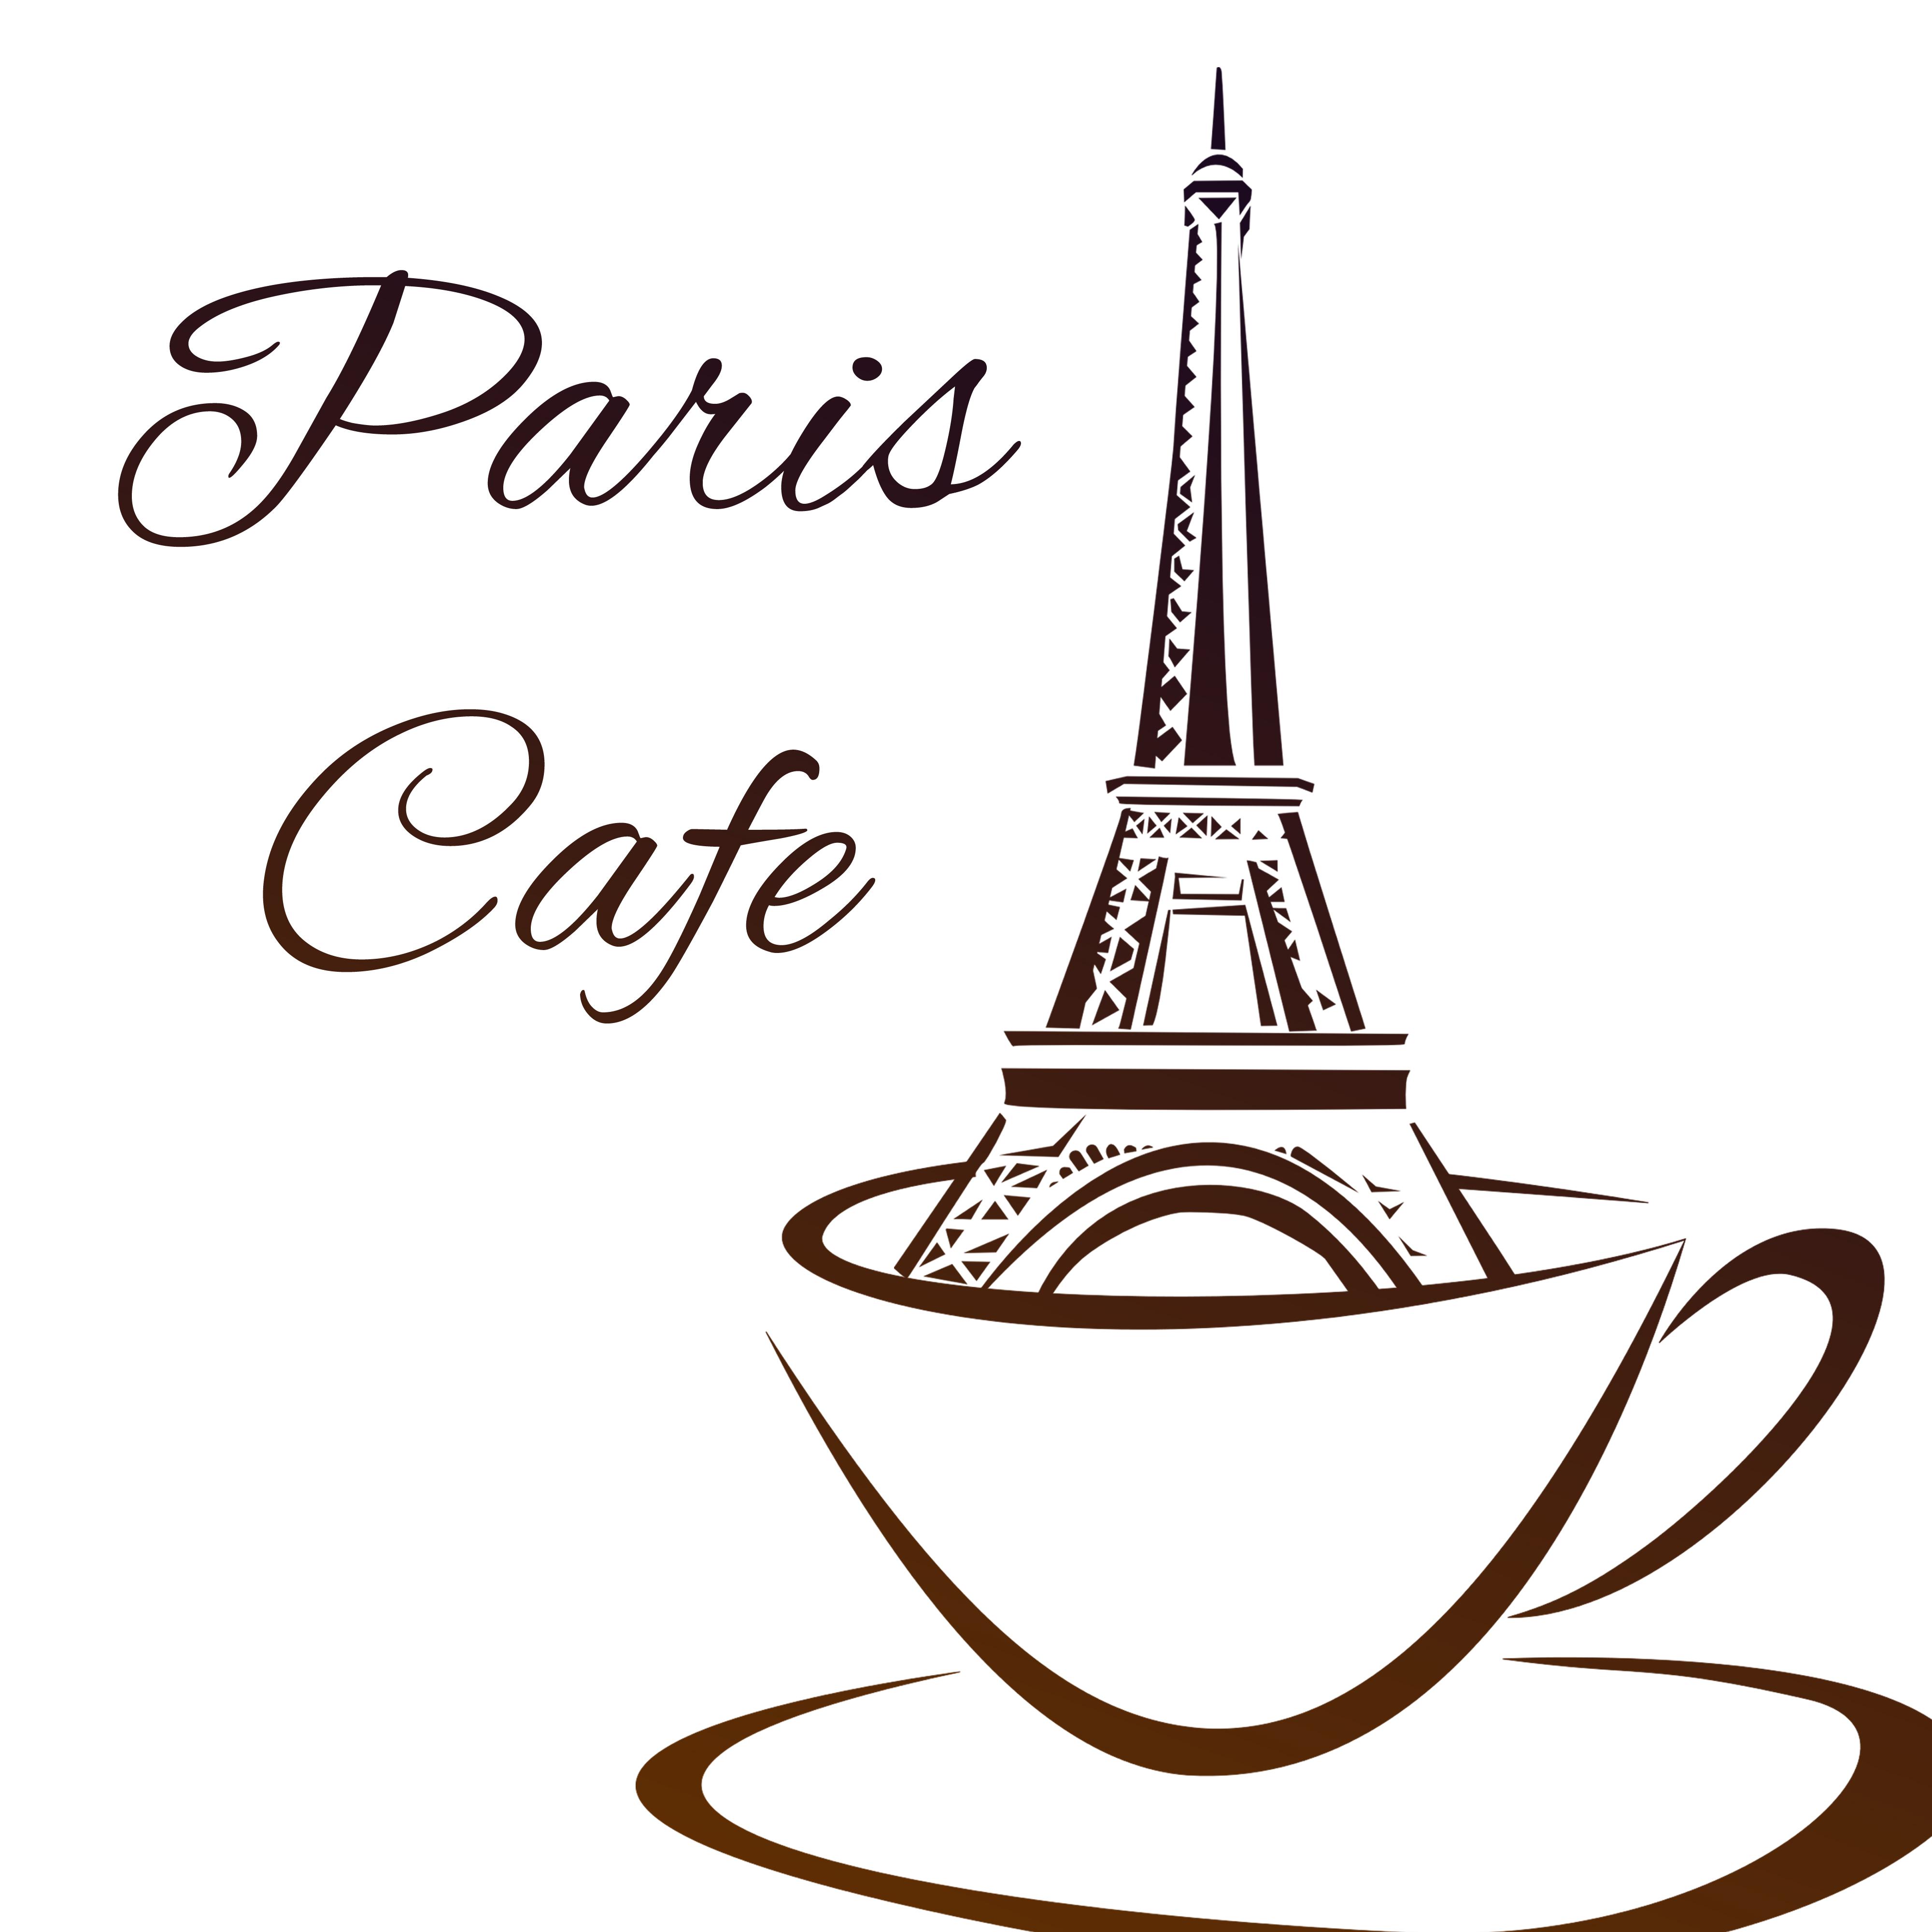 Paris Cafe – Relaxing Jazz Music, Coffee Talk, Good Mood, Jazz Cafe, Pure Rest with Family, Soft Sounds for Restaurant